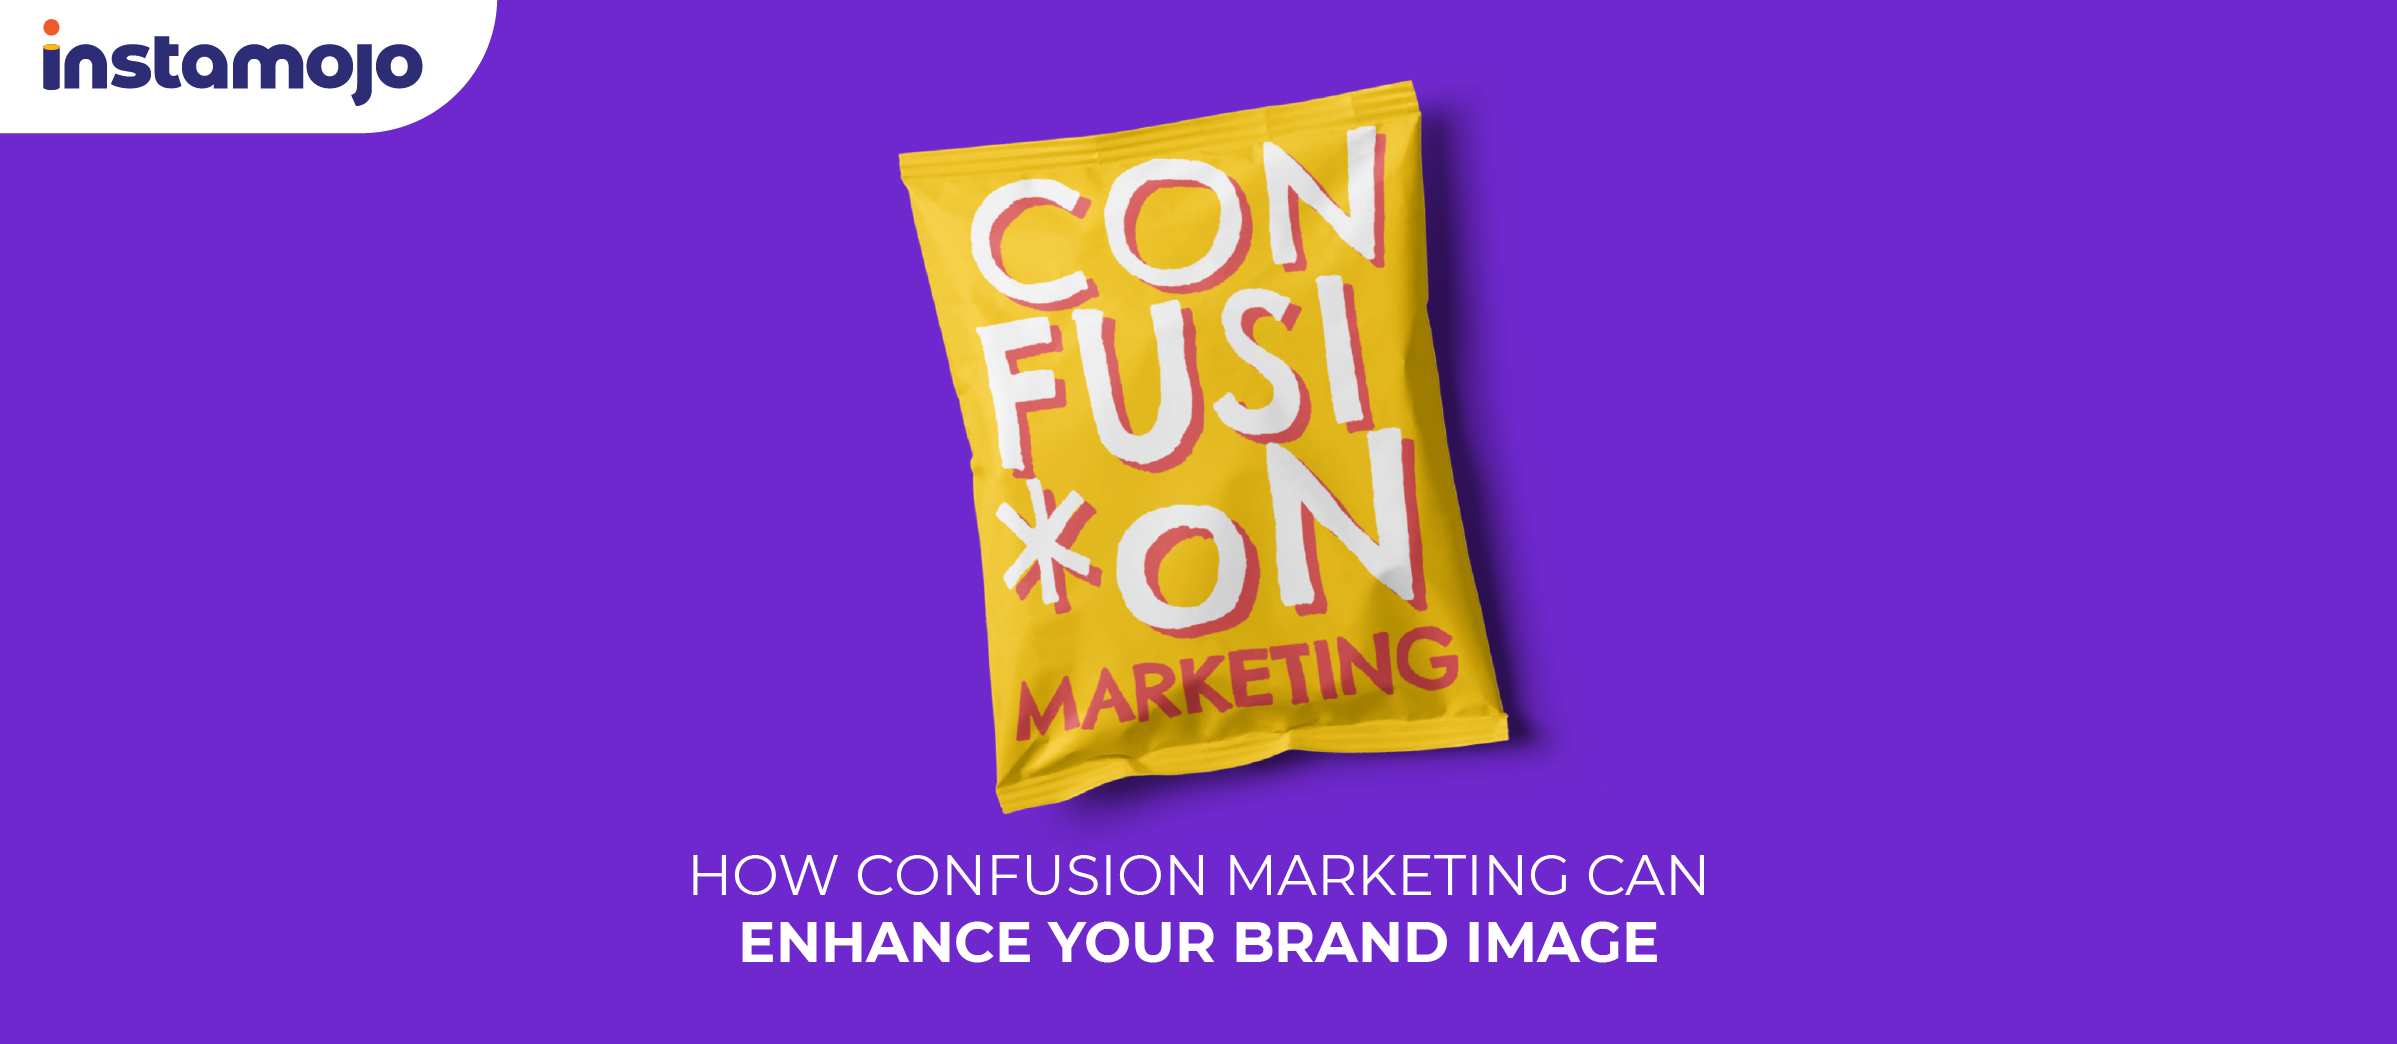 How Confusion Marketing Can Enhance your Brand Image